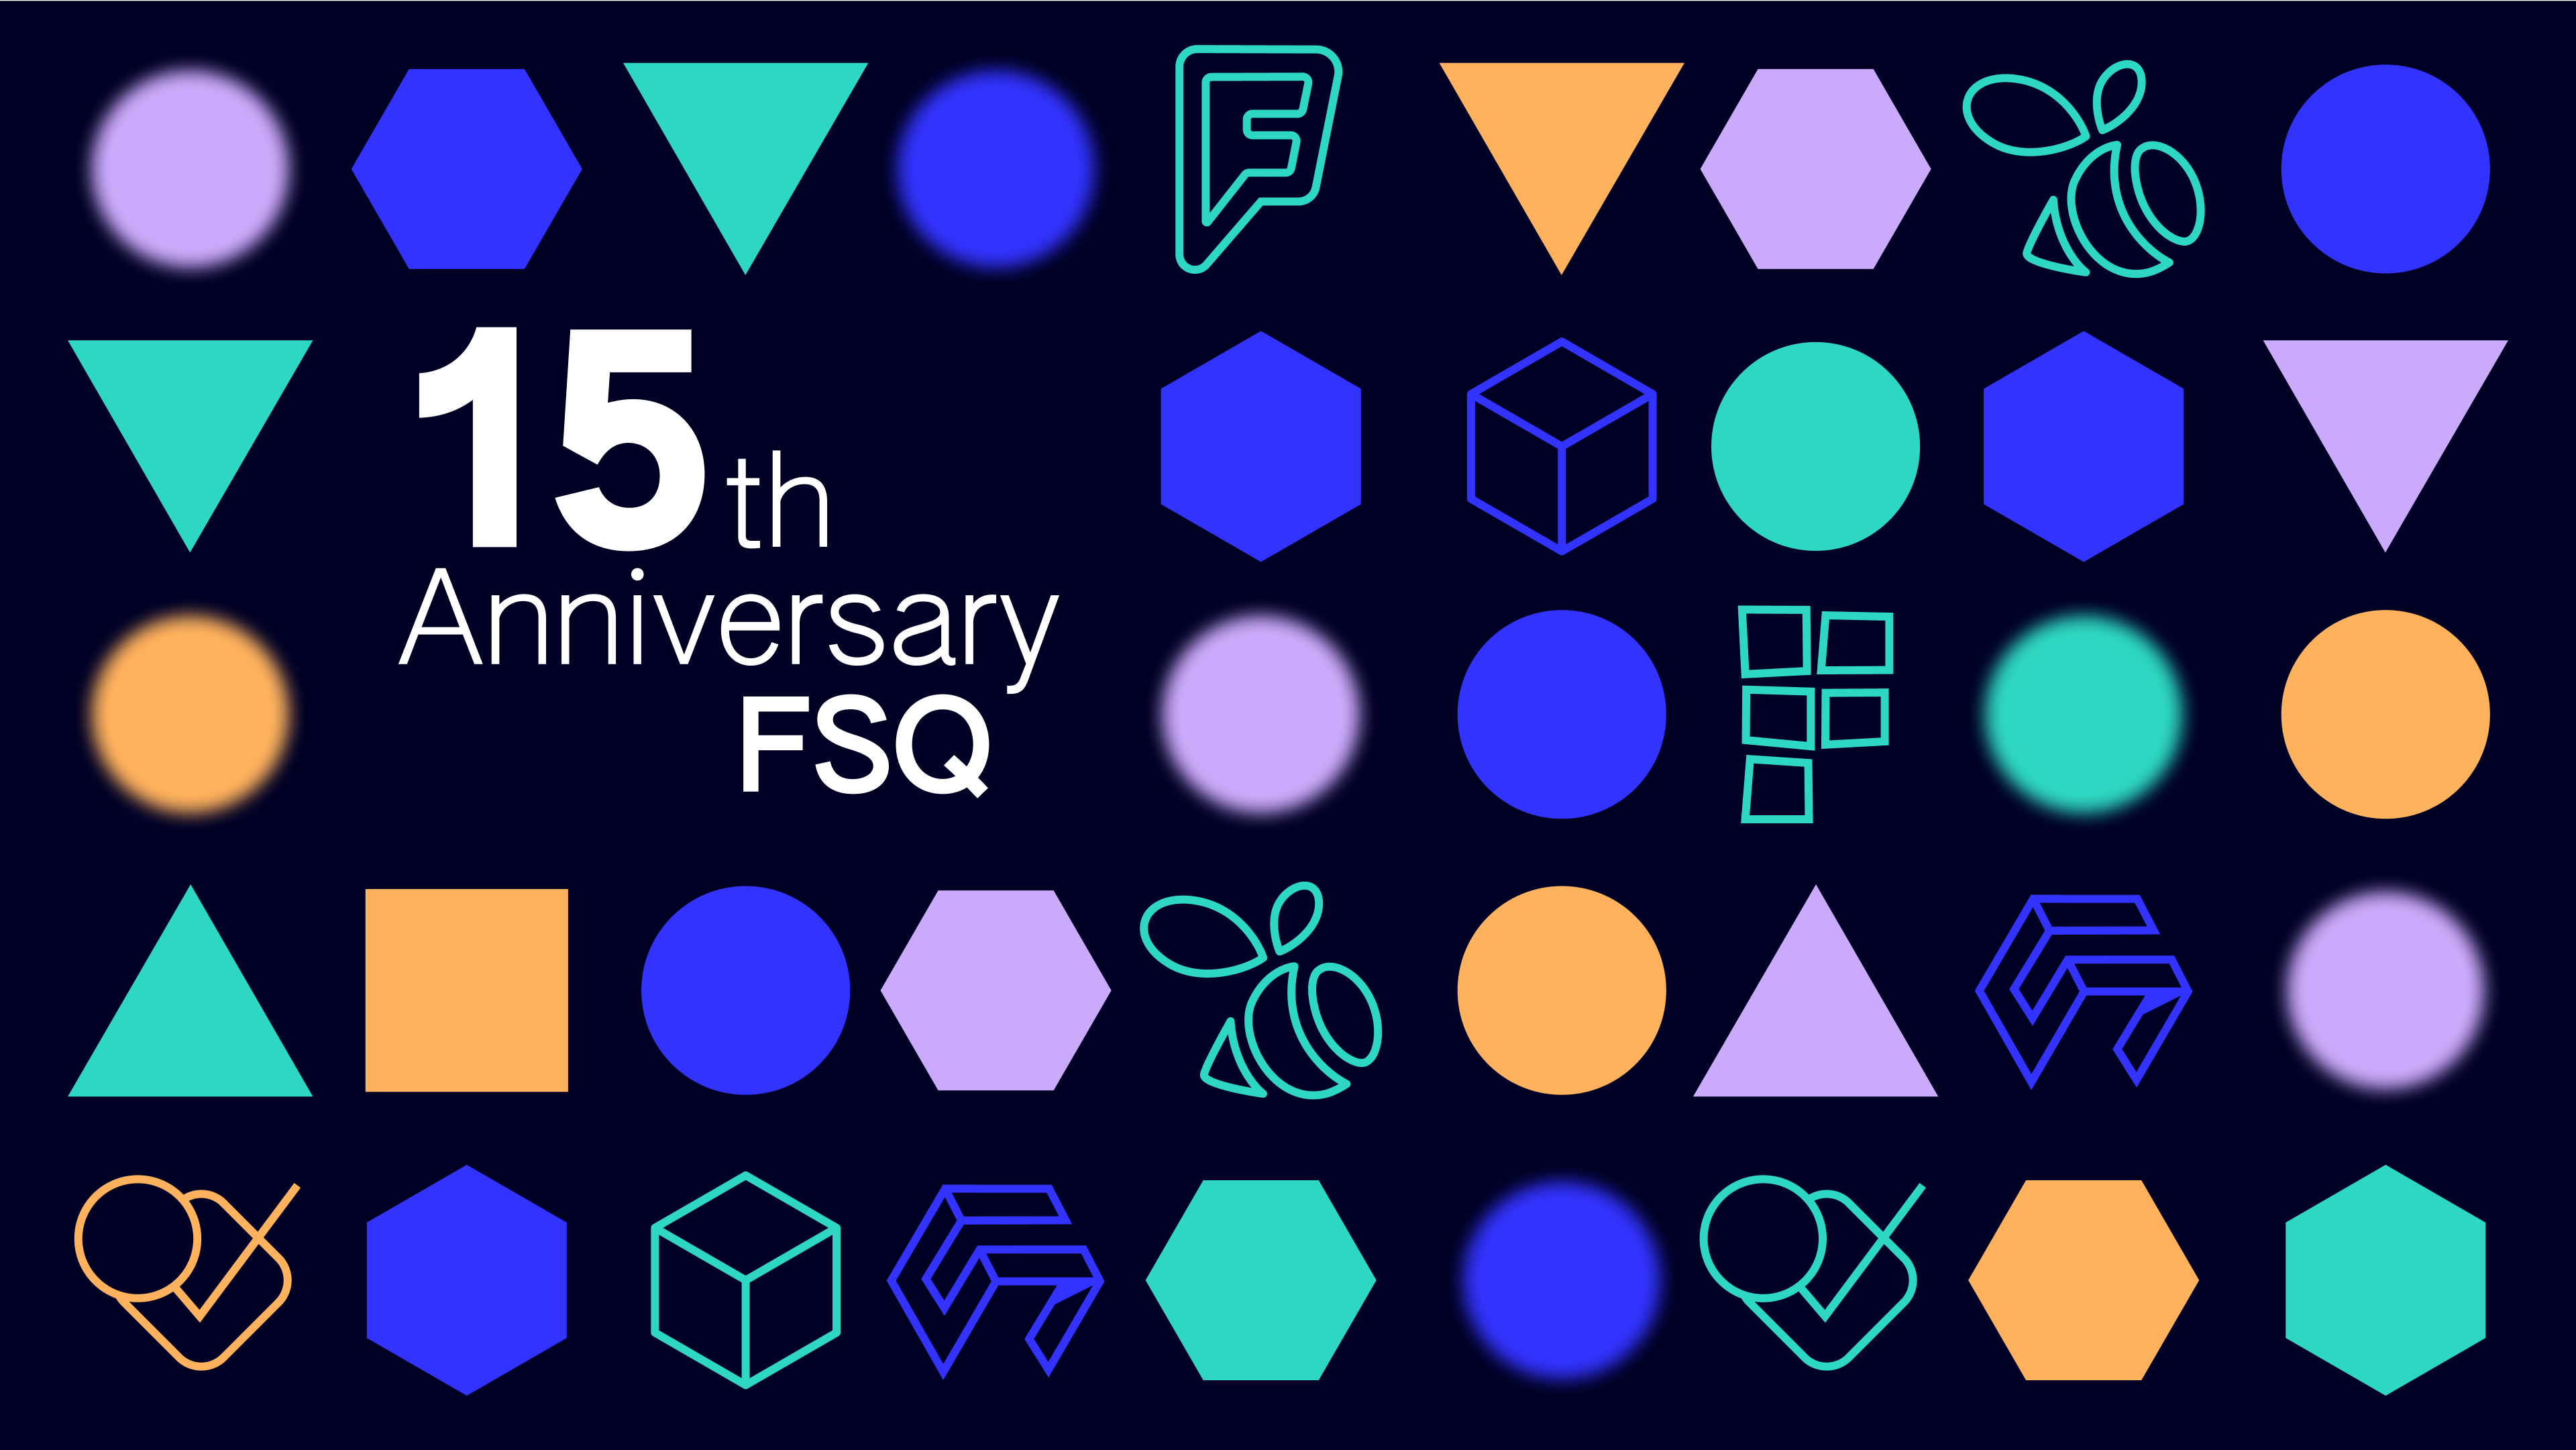 Foursquare Celebrates 15 Years of Innovation